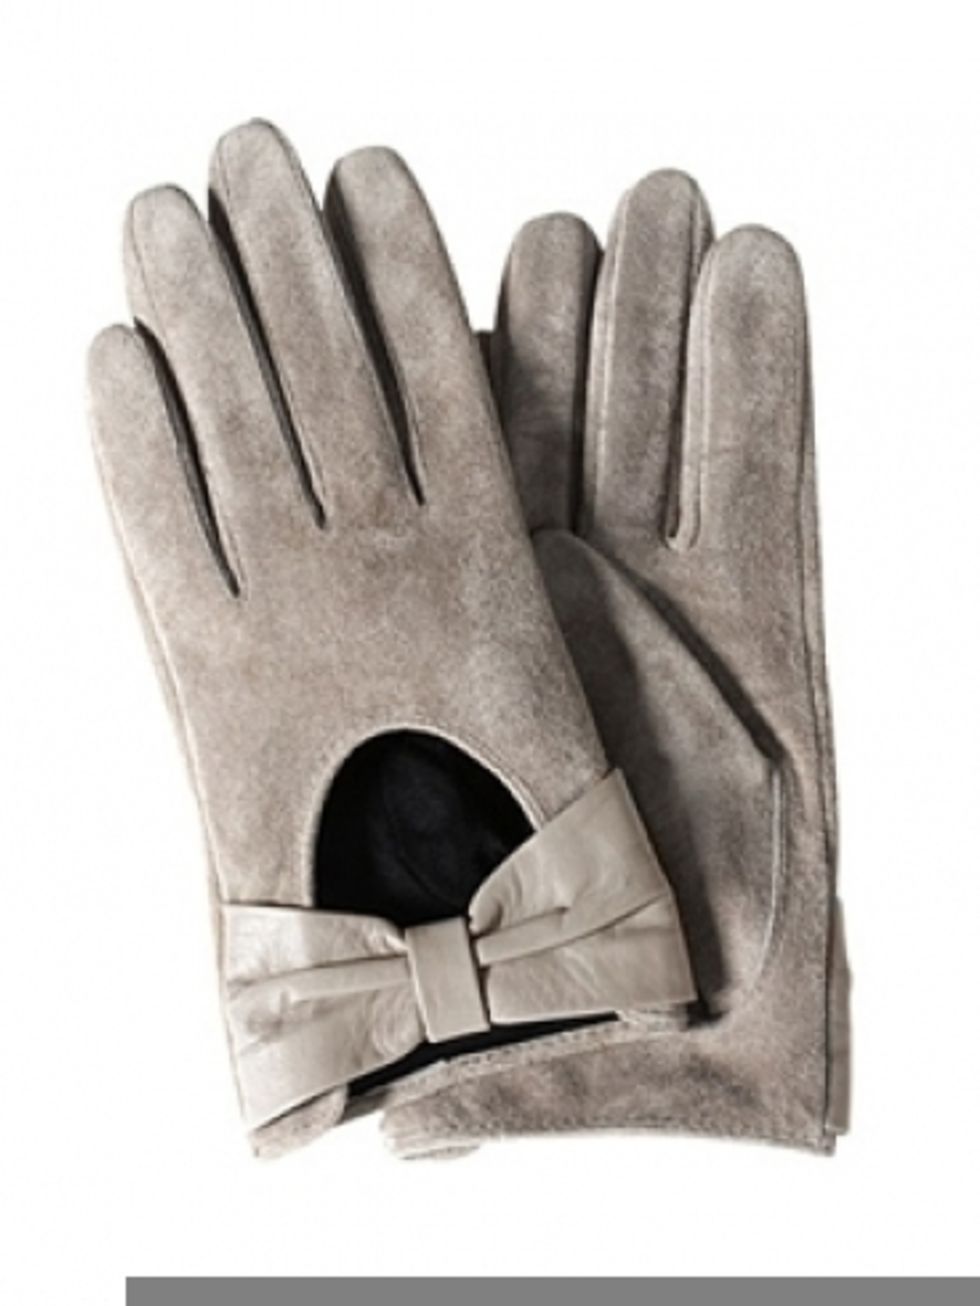 Finger, Hand, Personal protective equipment, Safety glove, Thumb, Wrist, Black, Gesture, Sports gear, Glove, 